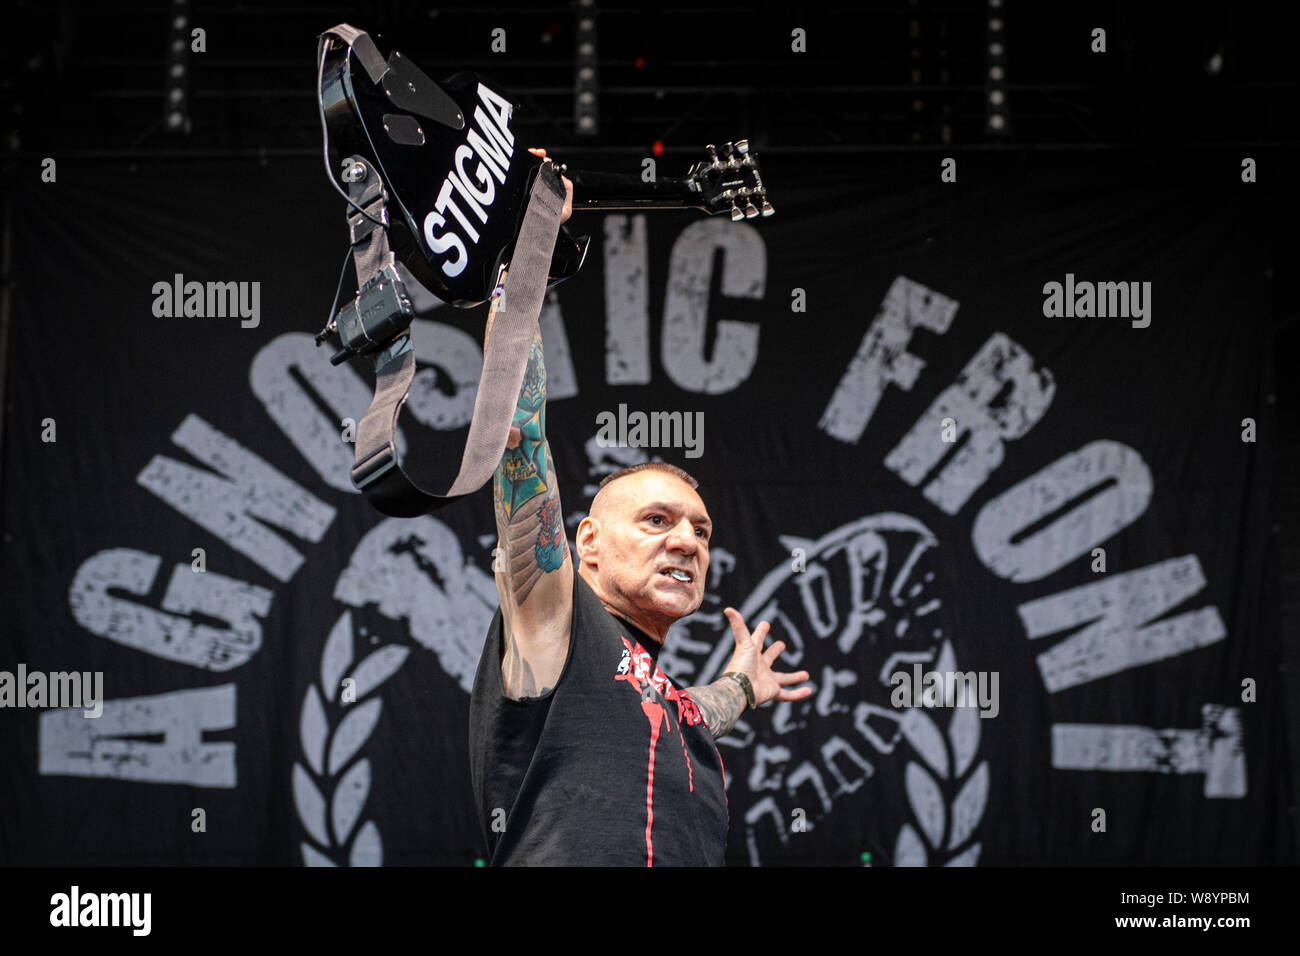 Josefov, Czech Republic. 09th Aug, 2019. Guitarist Vinnie Stigma of Agnostic Front, American music band, performs during the Brutal Assault metal music festival, on August 9, 2019, in Jaromer, Czech Republic. Credit: David Tanecek/CTK Photo/Alamy Live News Stock Photo